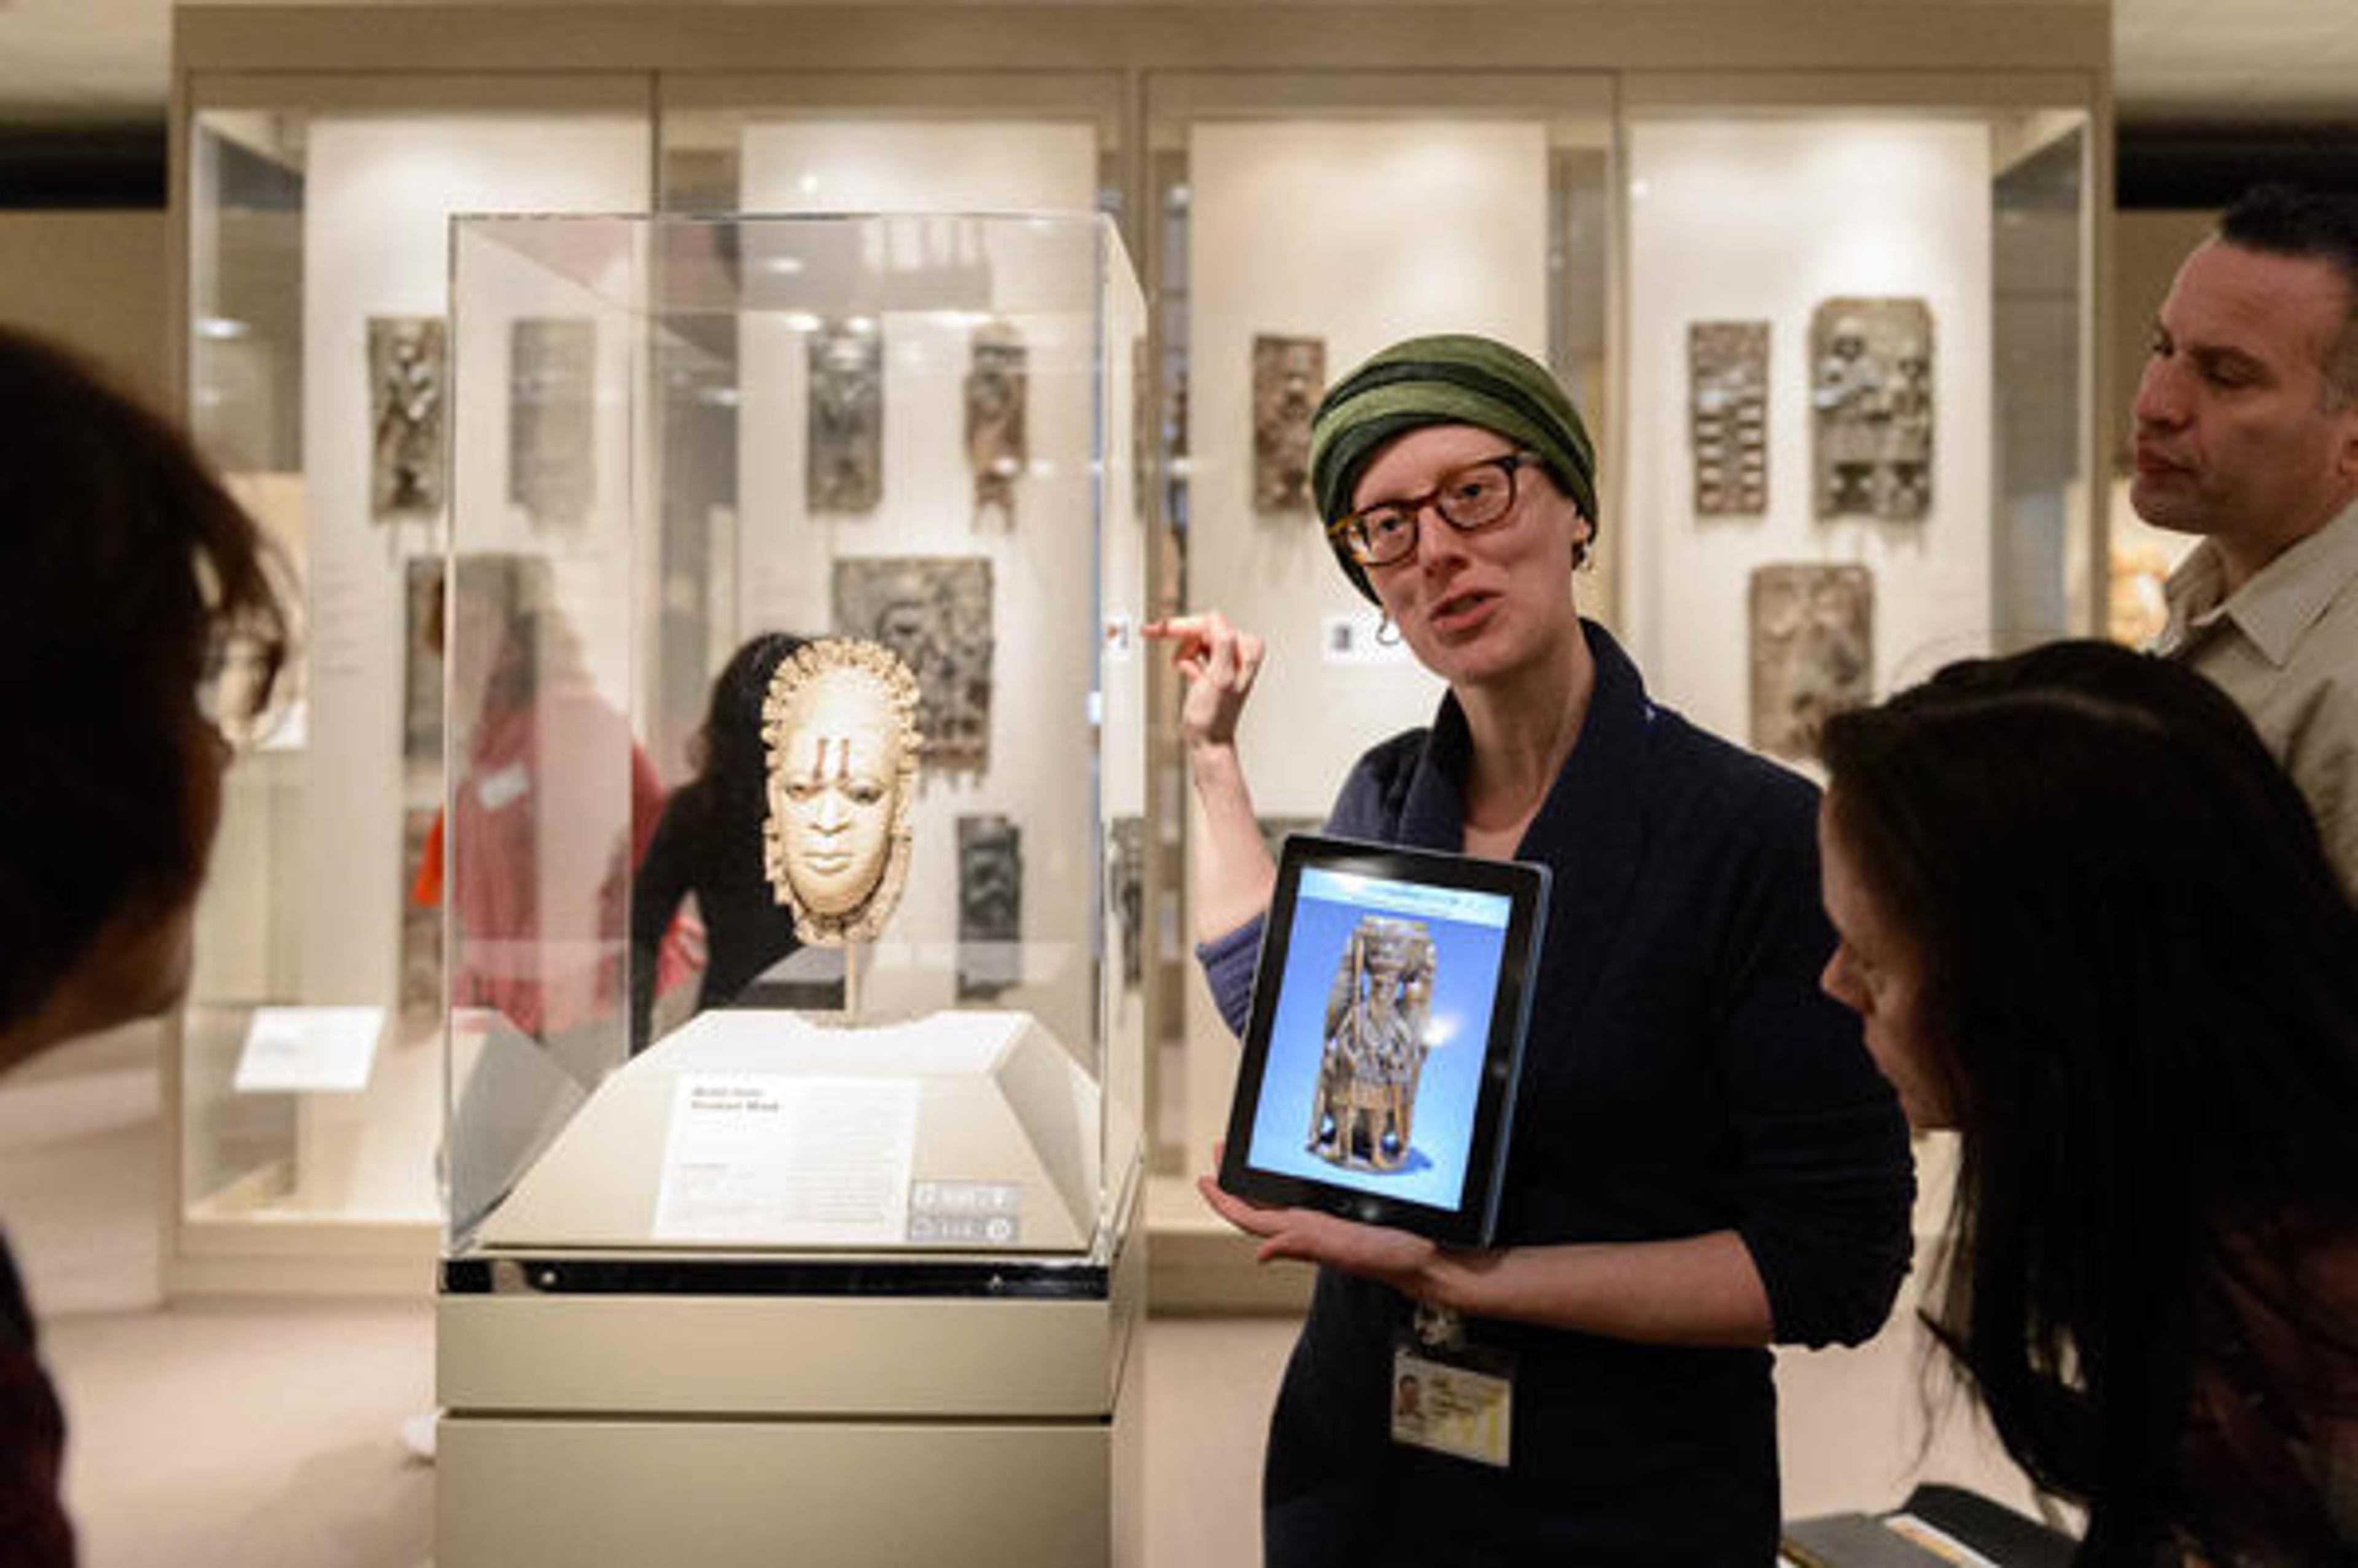 Betsy Gibbons, assistant museum educator for High School Internships, leads a guided tour. Photograph by Filip Wolak